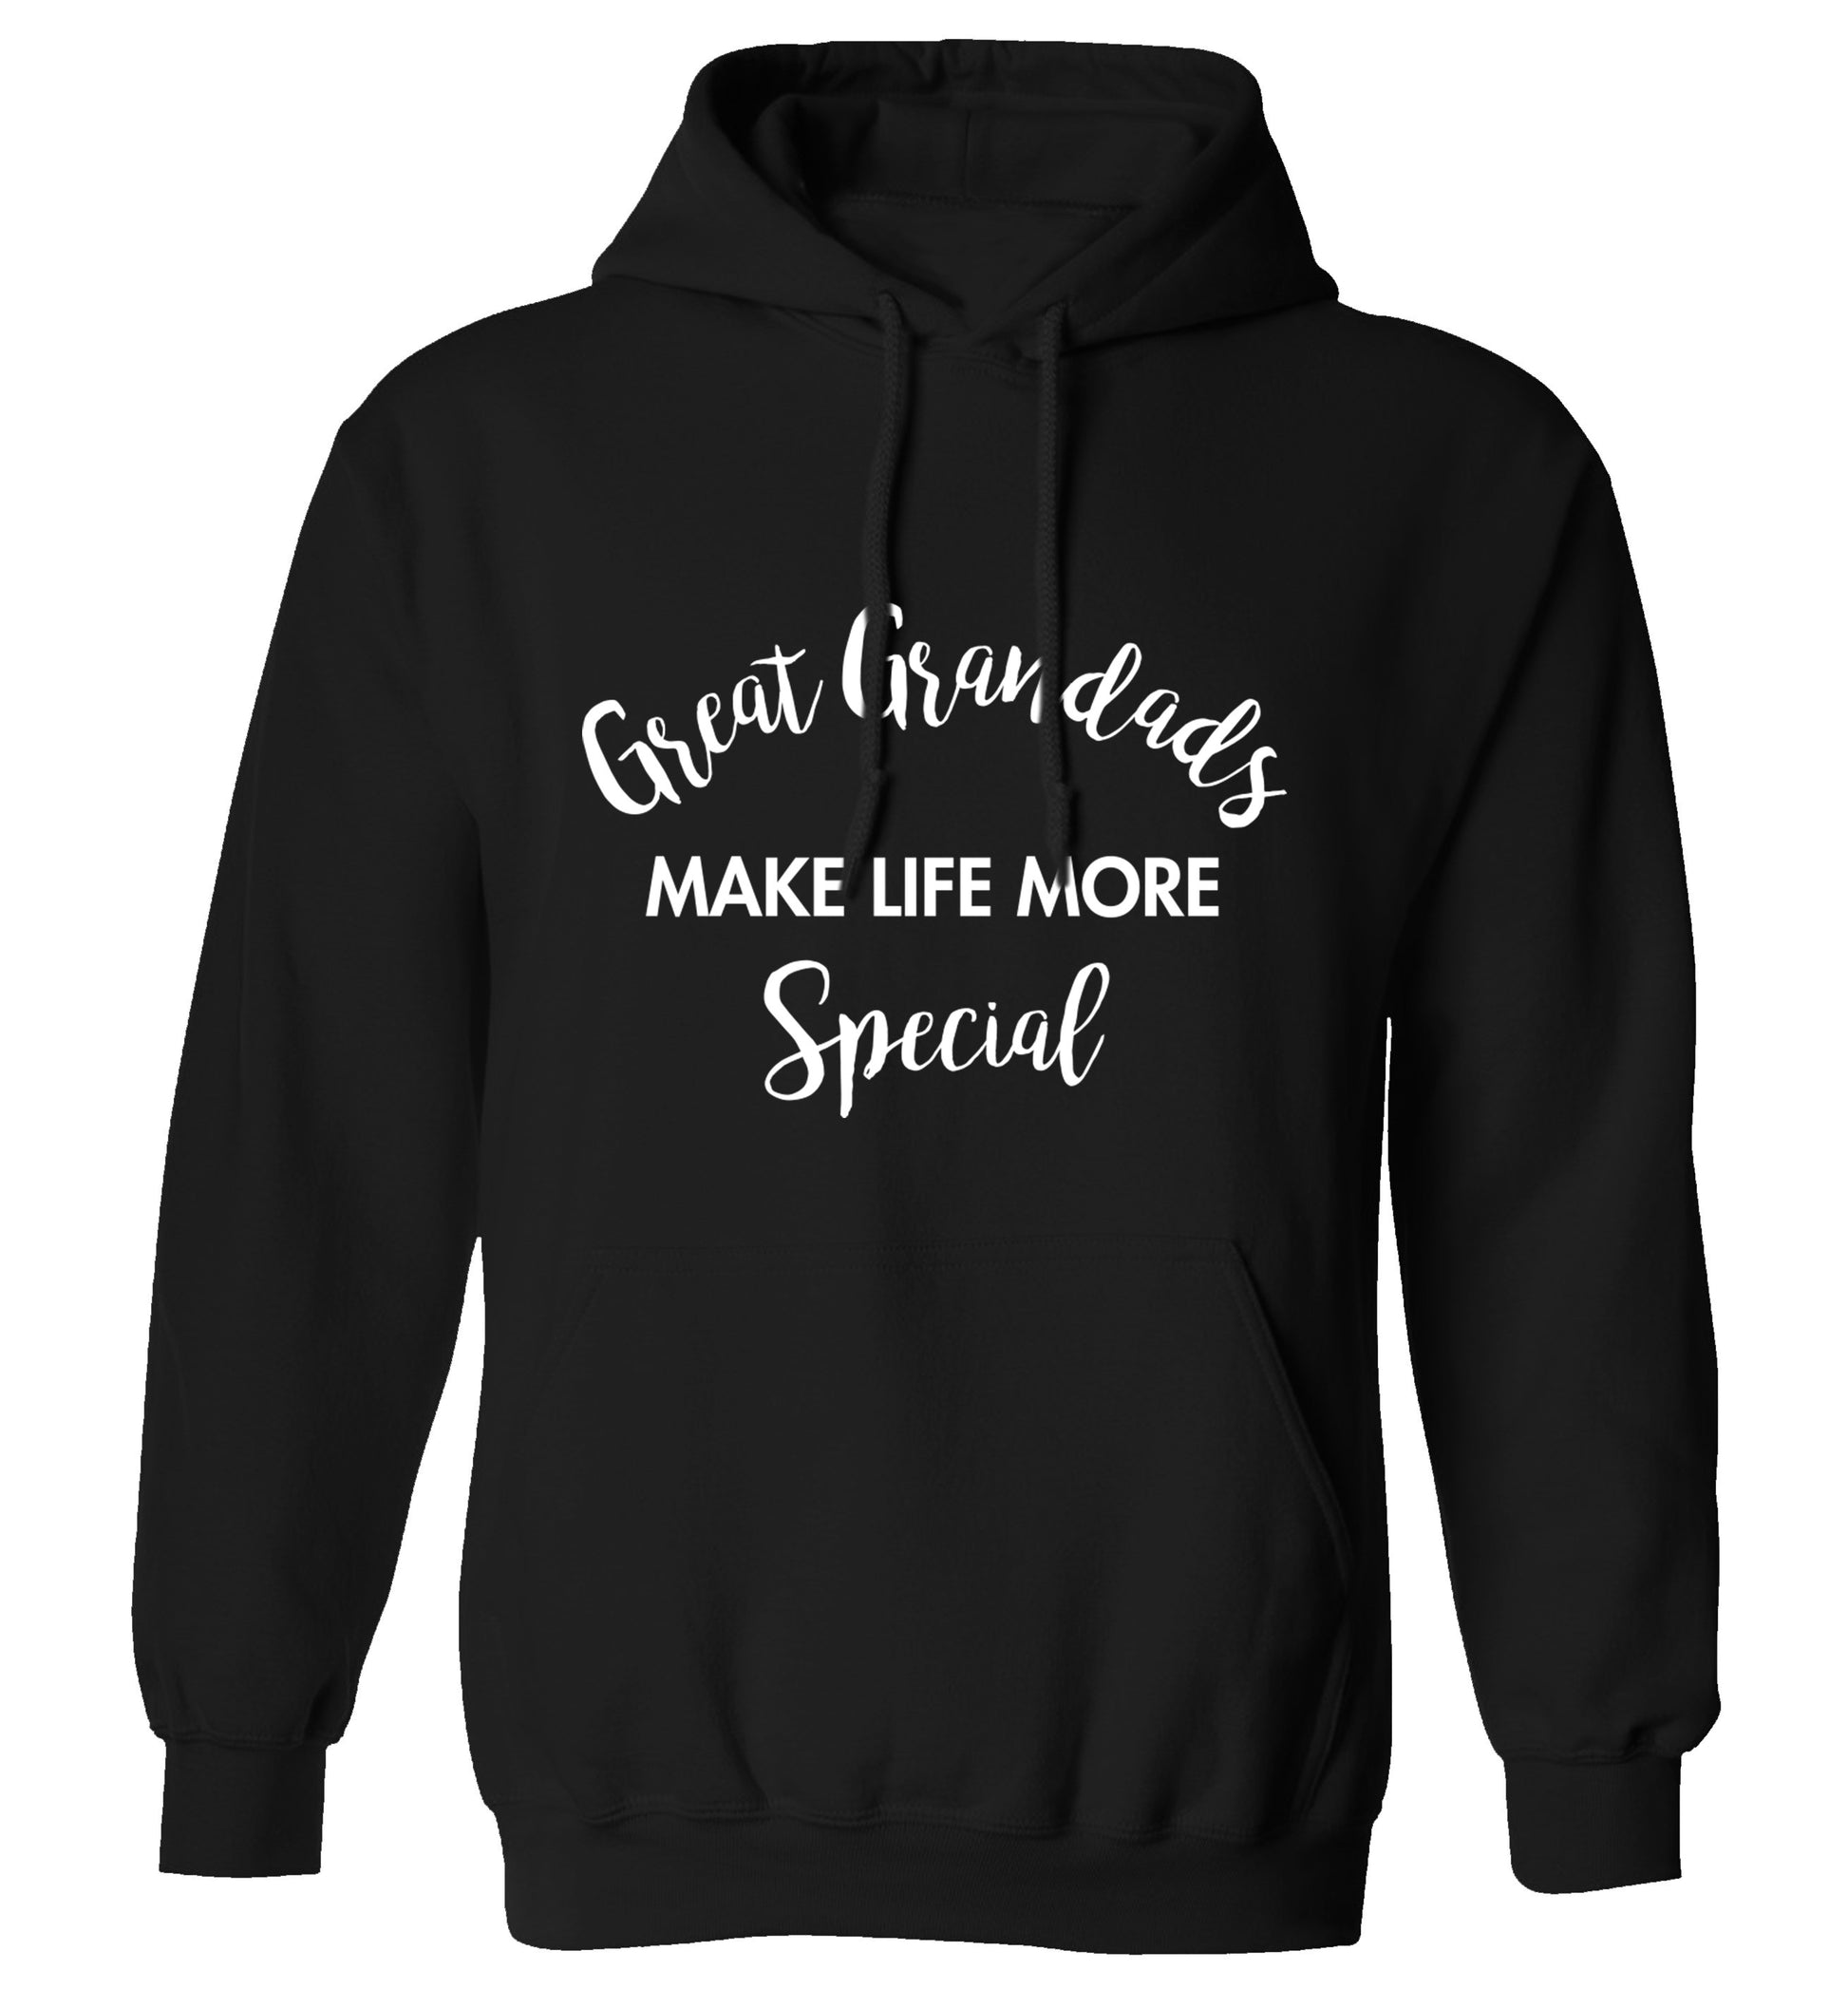 Great Grandads make life more special adults unisex black hoodie 2XL